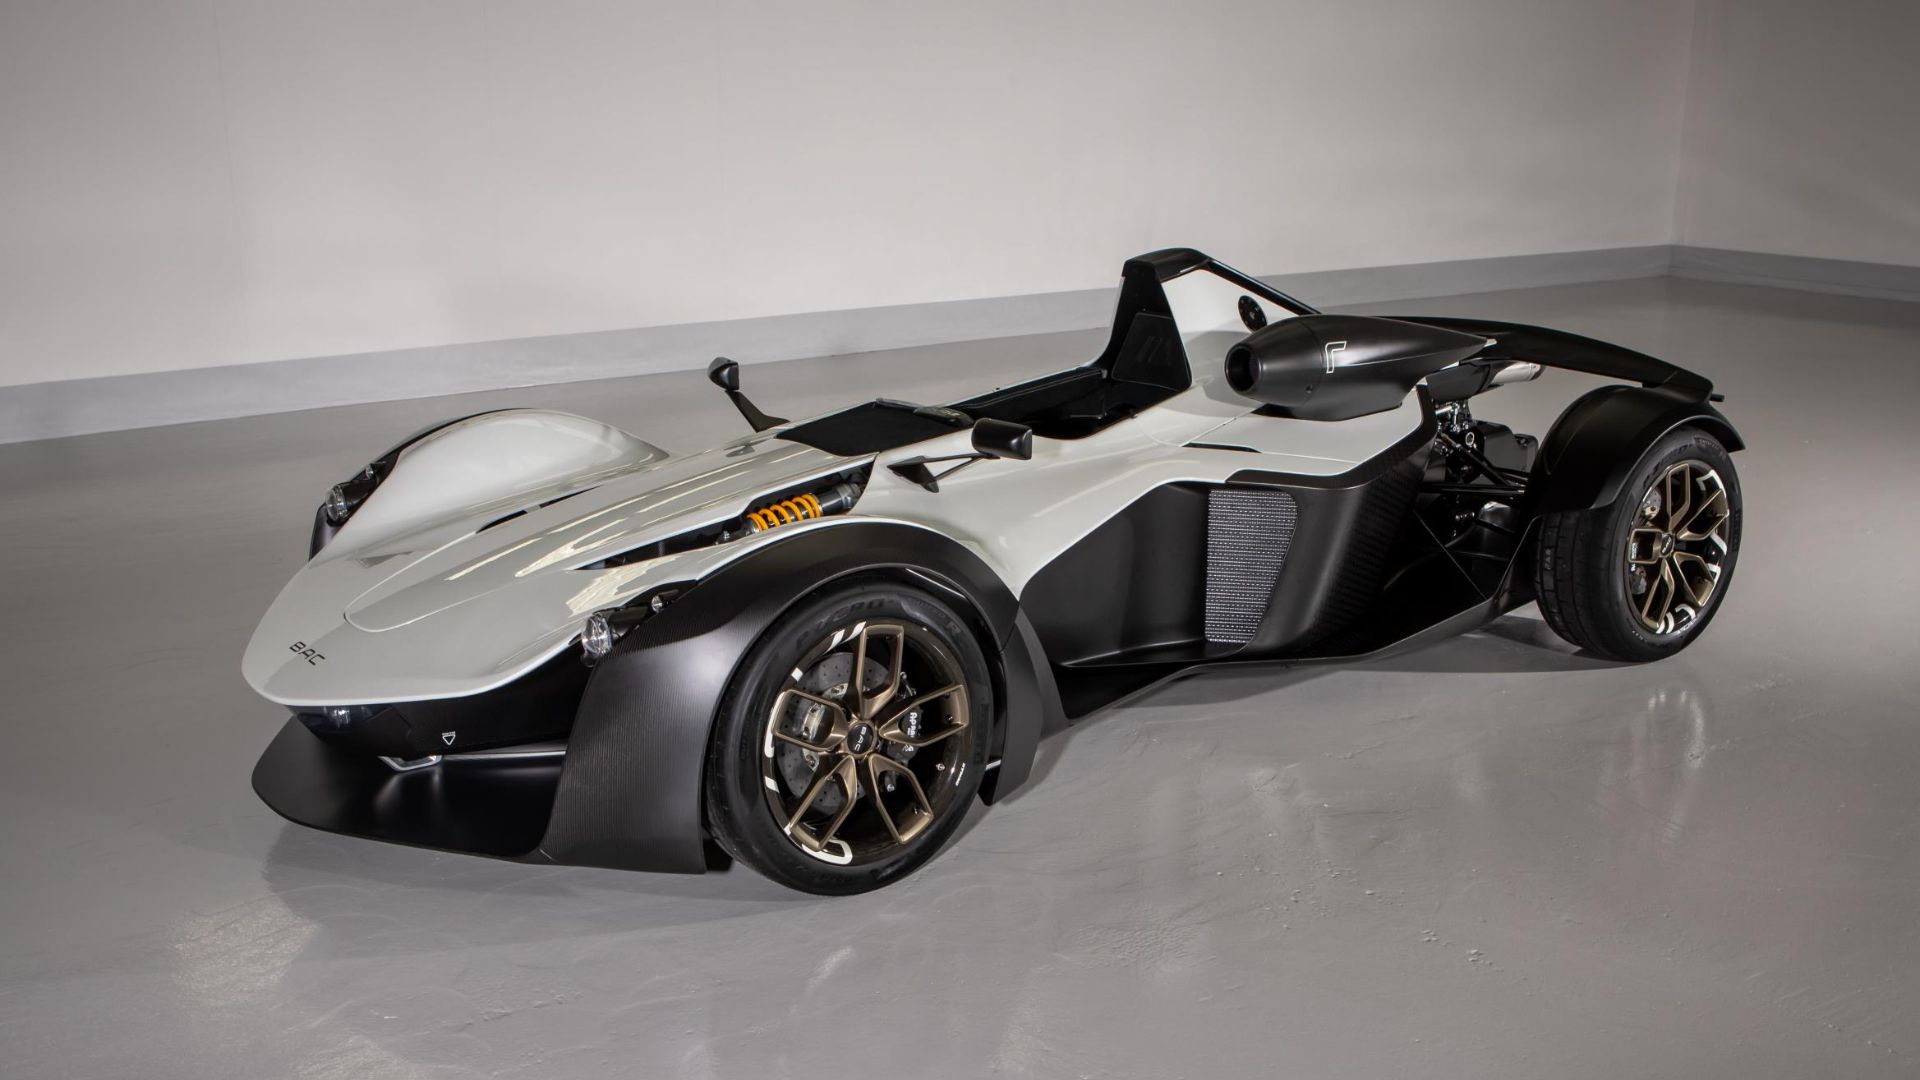 BAC Mono beats Brexit with export deal